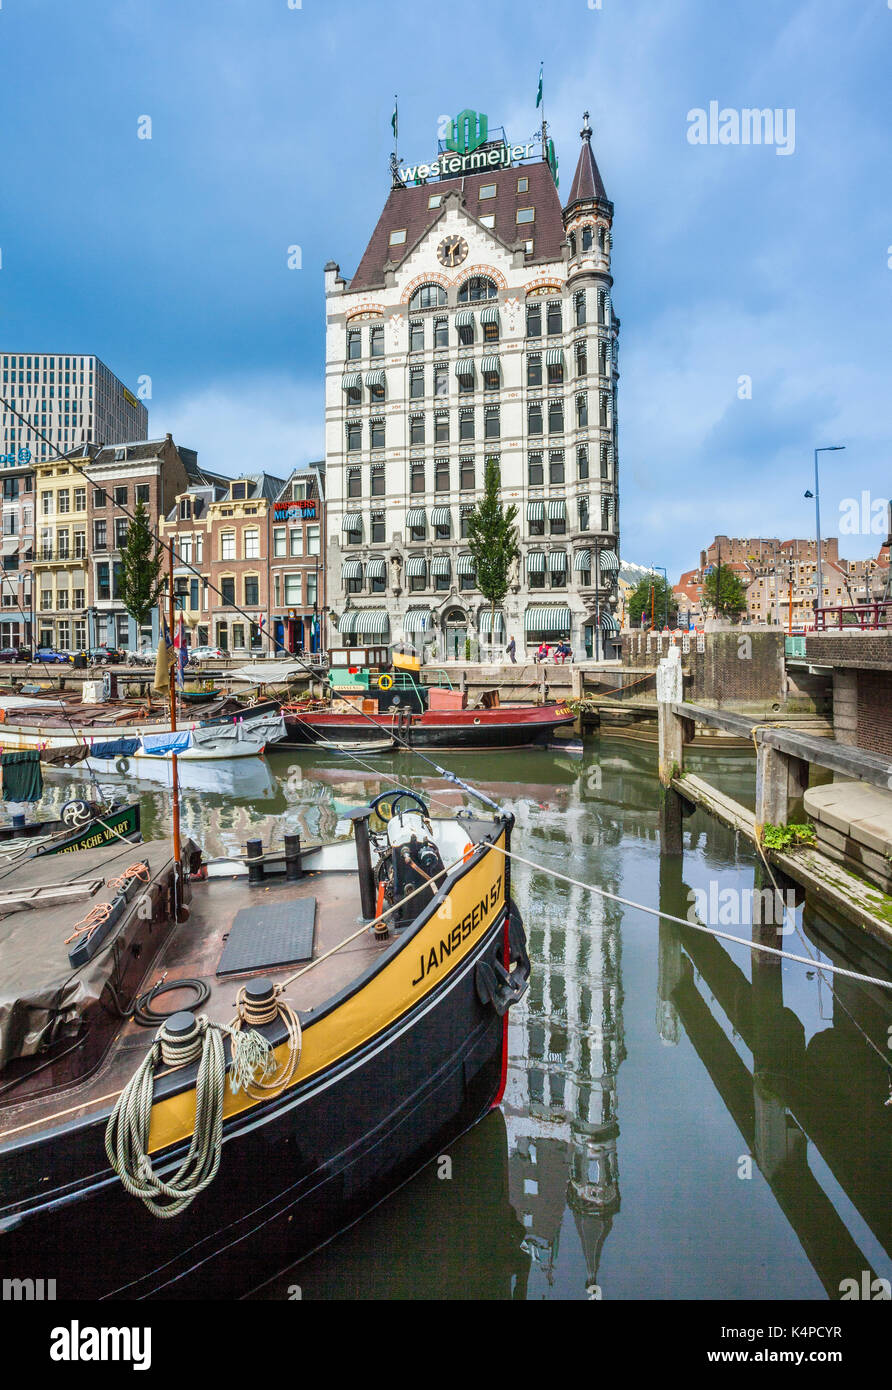 Netherlands, South Holland, Rotterdam, Maritime District, Wijnhaven with view of the Art Nouveau style Witte Huis (White House), built in 1898, the fi Stock Photo